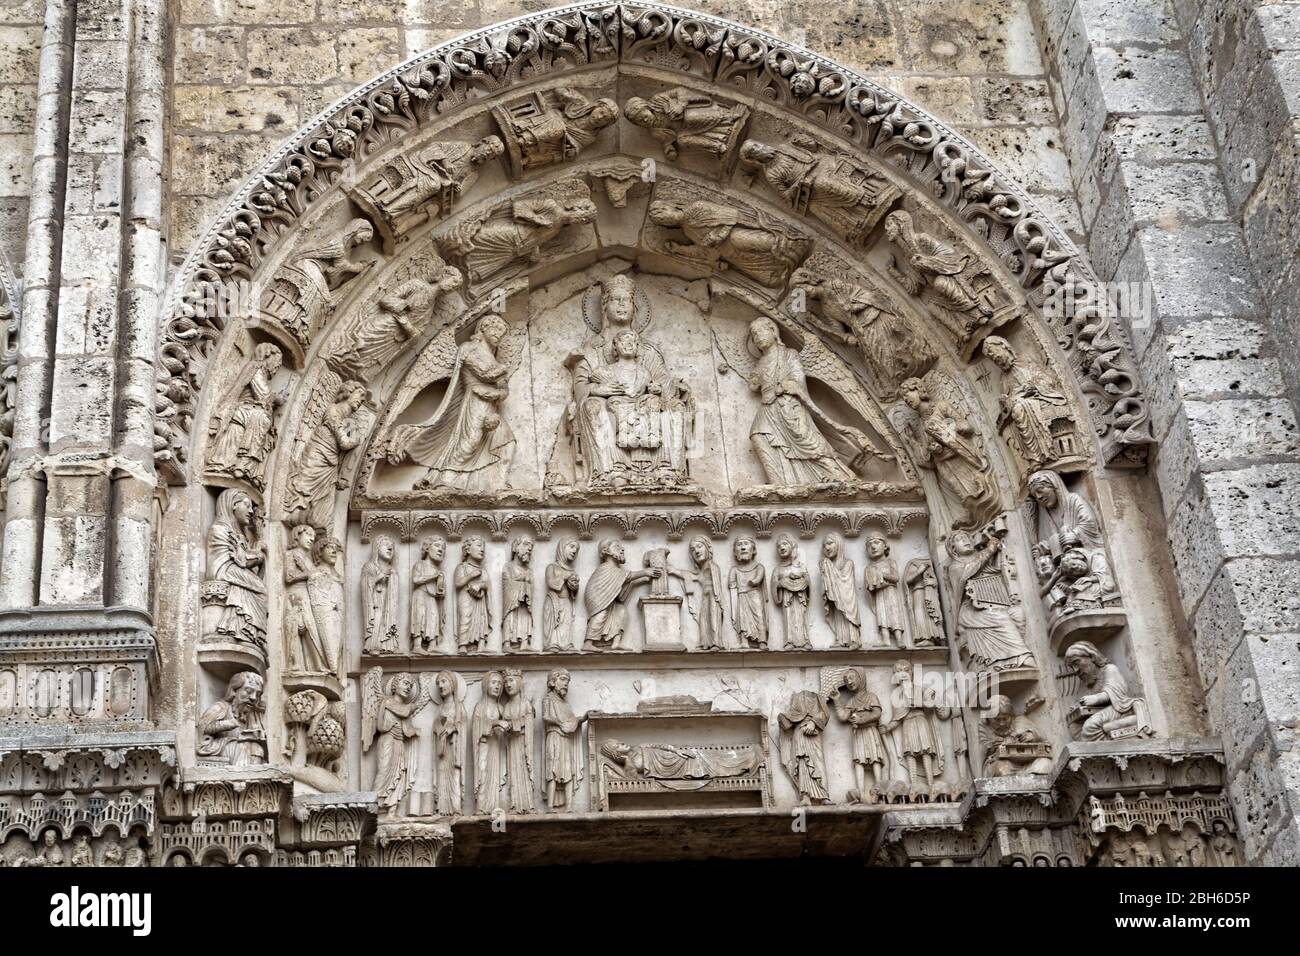 The West - Royal - Portal, Chartres Cathedral, Chartres, France - Cathédrale Notre-Dame de Chartres Stock Photo